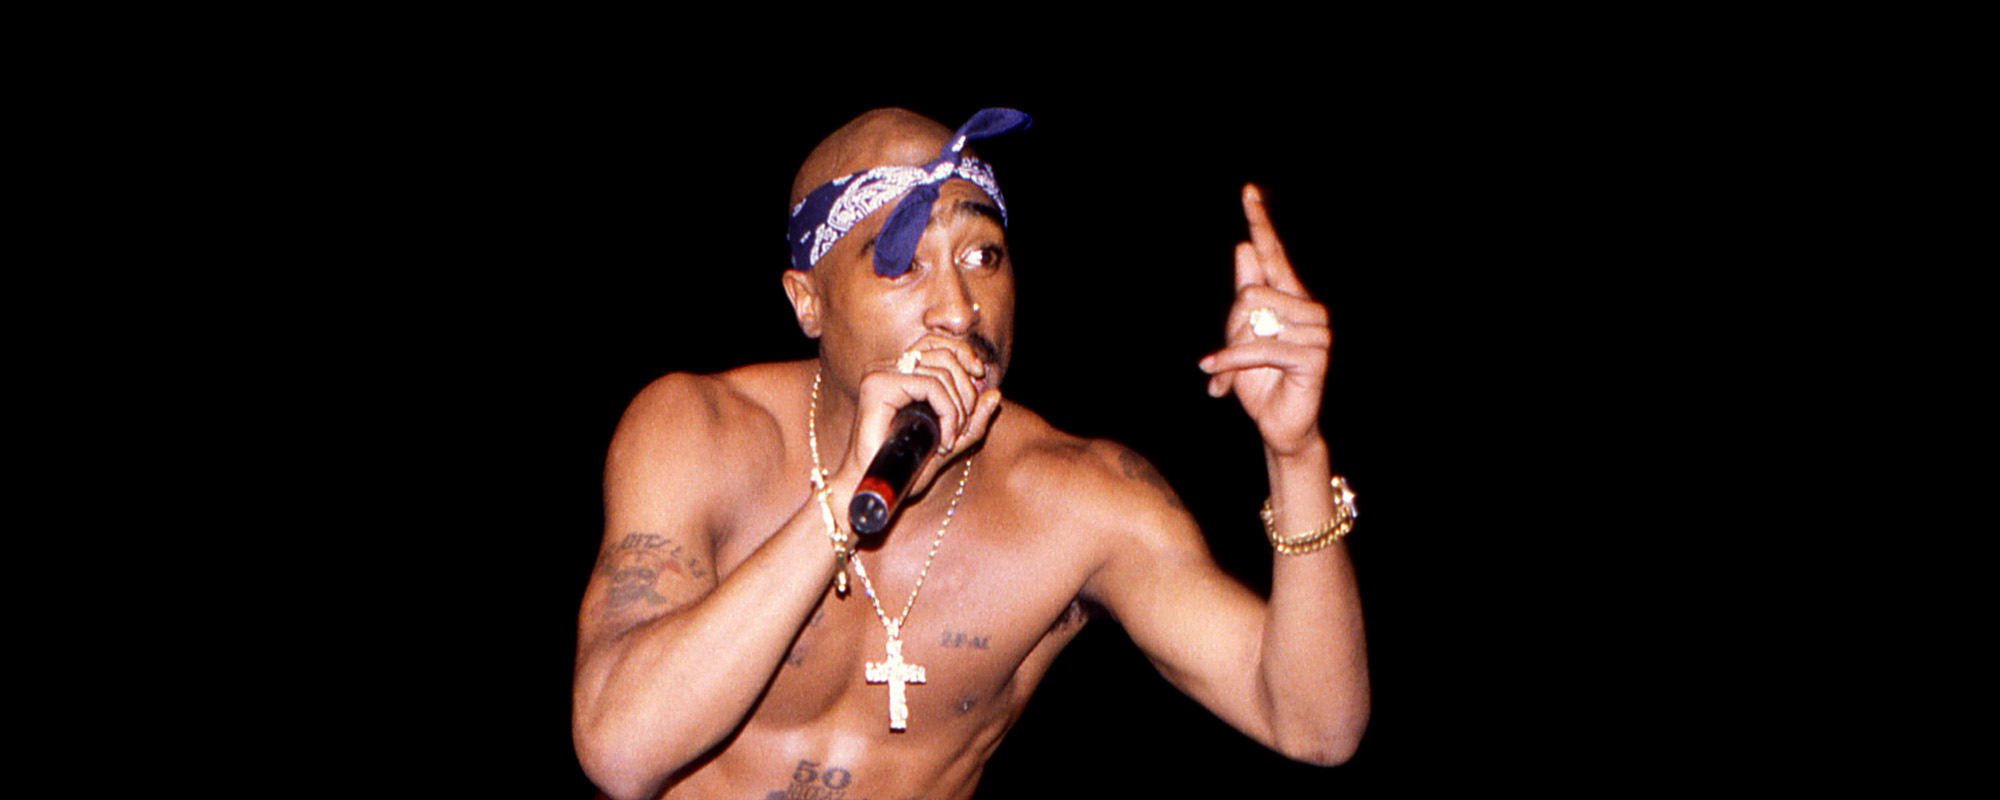 Video Surfaces of Tupac’s Murder Suspect Being Arrested